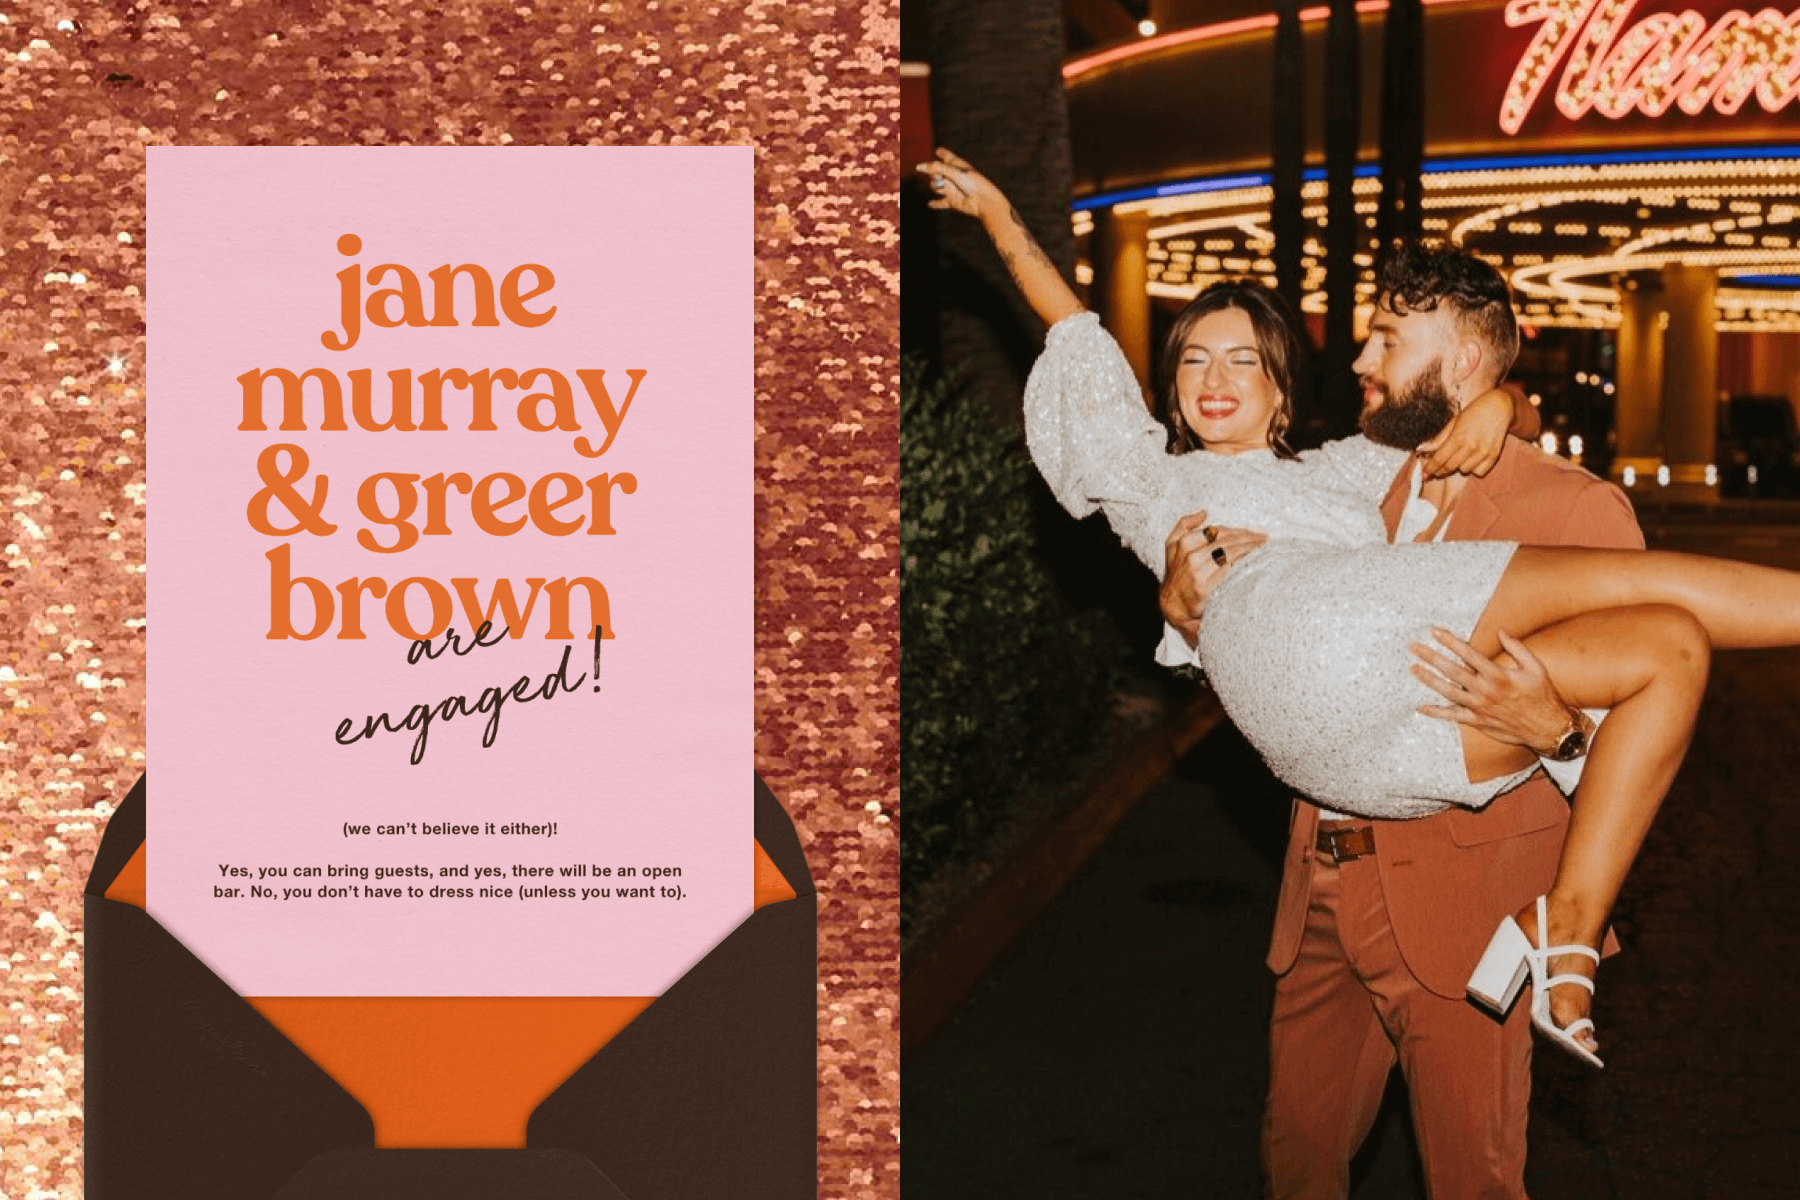 Left: A pink engagement party invitation with large orange text that reads “Jane Murray & Greer Brown are engaged!”; Right: A groom holds a bride in his arms outside a lit-up theater.